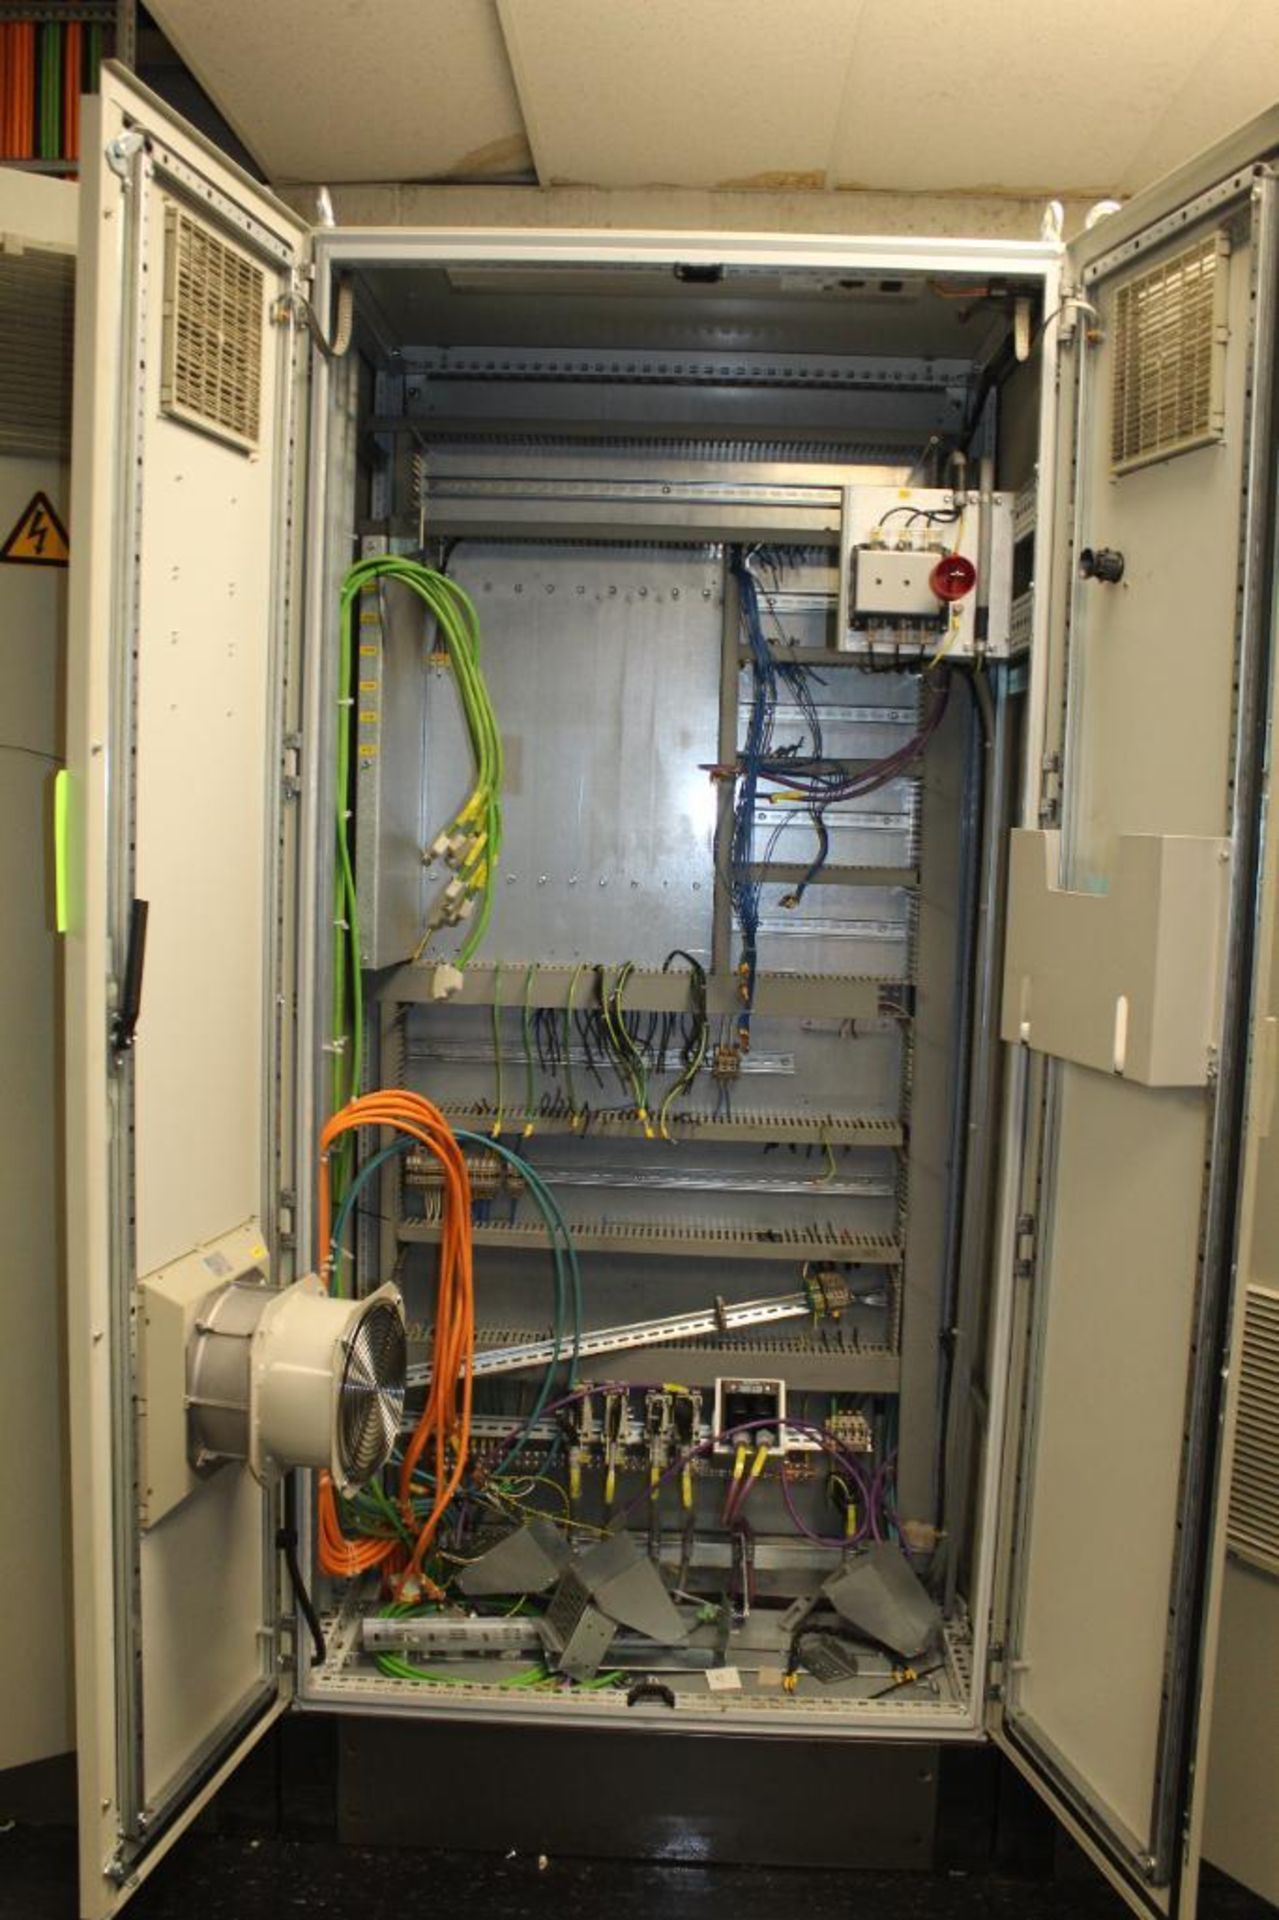 Electrical Cabinet - Image 2 of 2